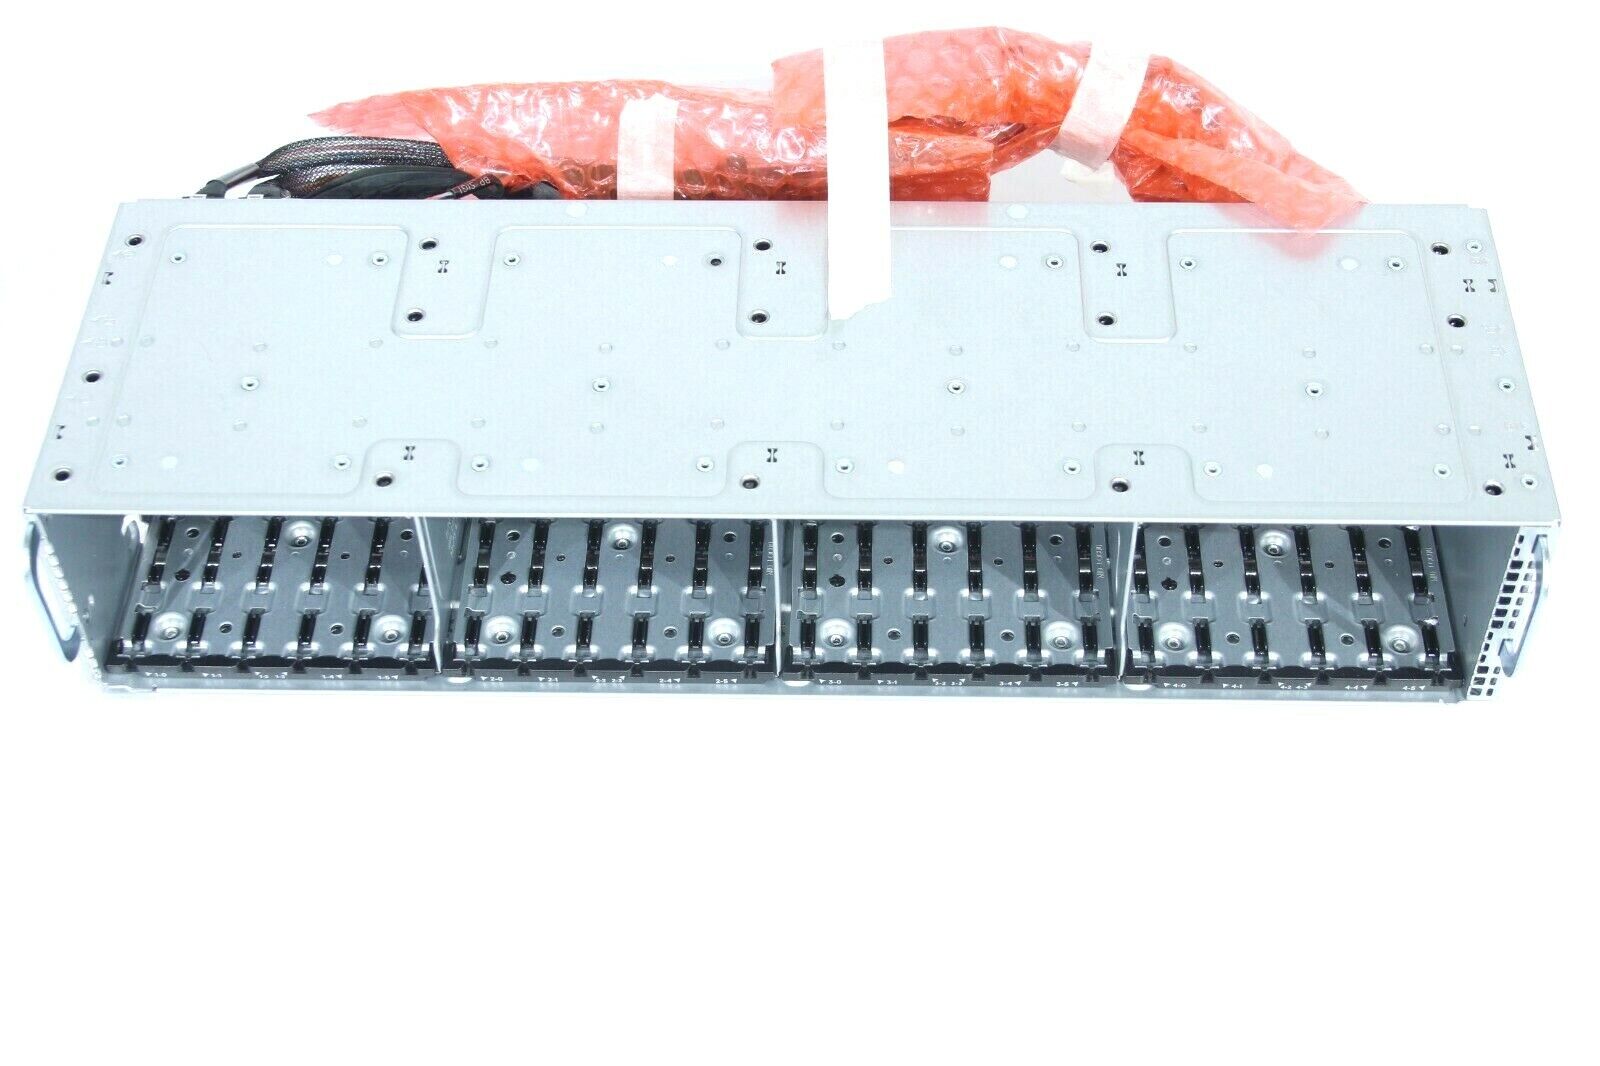 J2NM9 DELL POWEREDGE C6400 2.5” NVME 20 BAY HD CAGE ASSY WITH CABLES NEW~